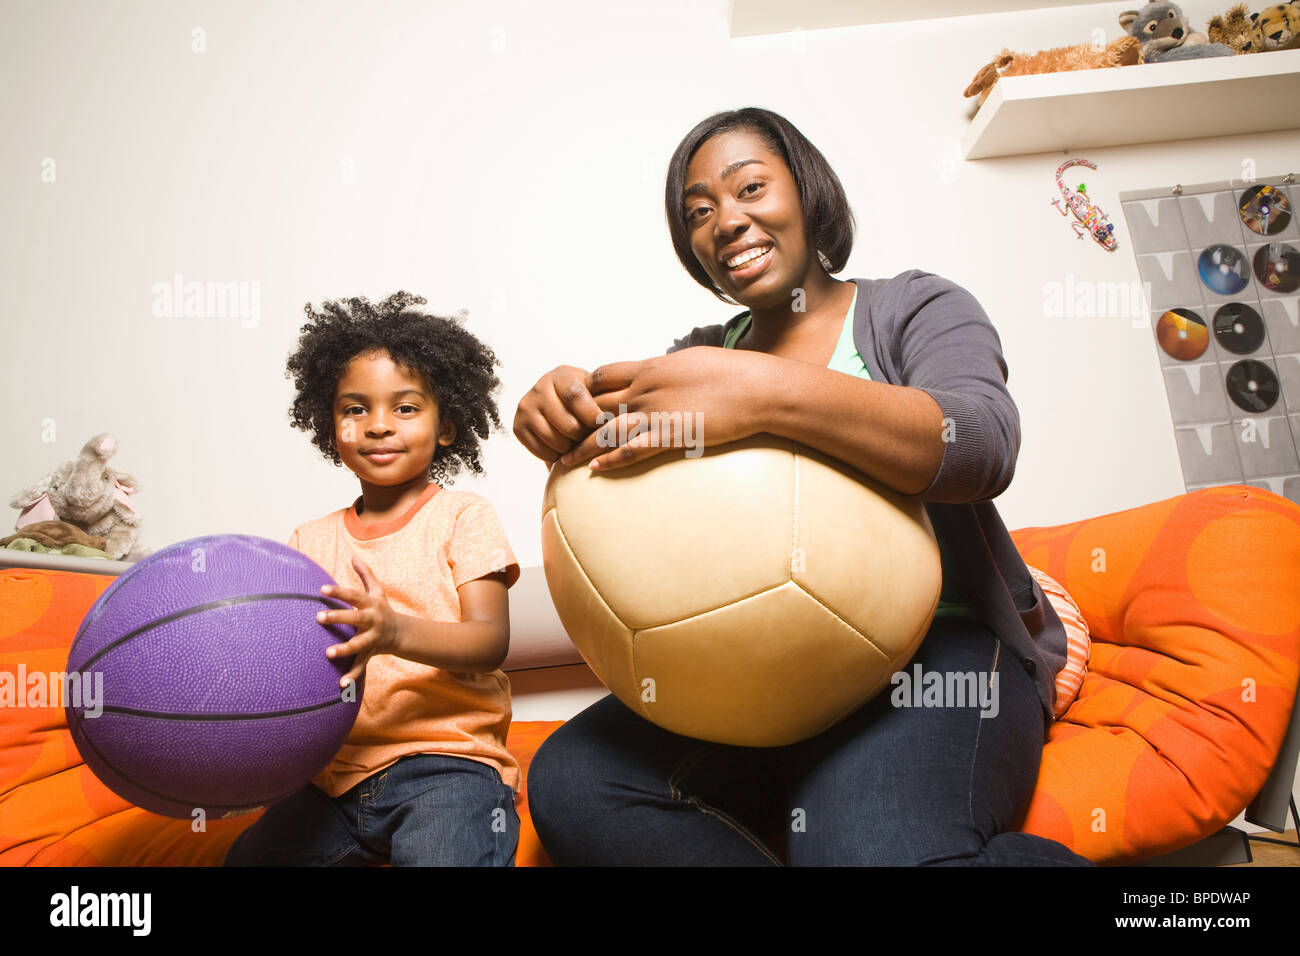 African American mother and son holding balls Stock Photo